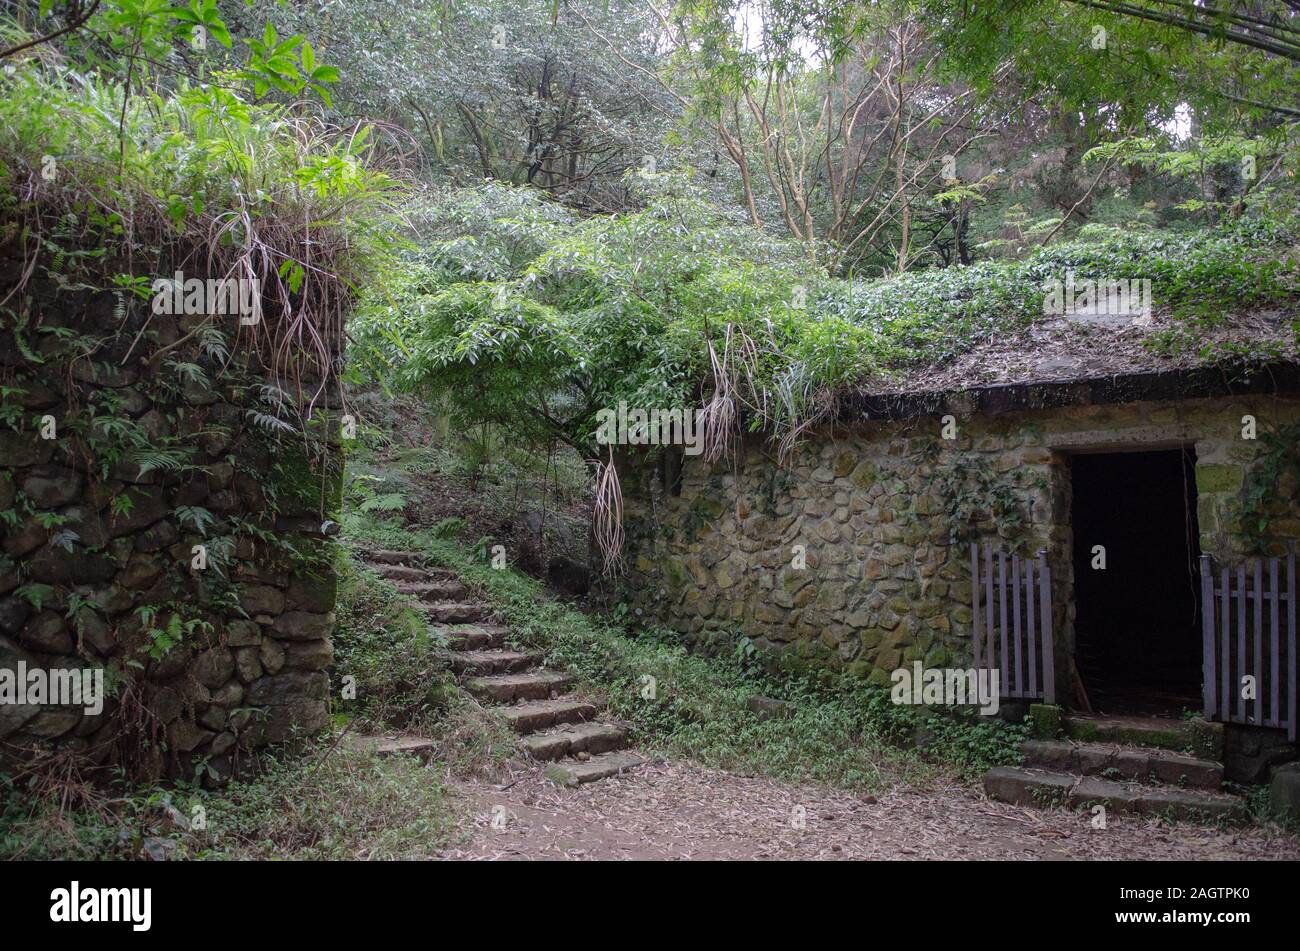 A old stone house is no longer in use and overgrown with plants in Yangmingshan National Park ( 陽明山國家公園 ) in Taiwan Stock Photo